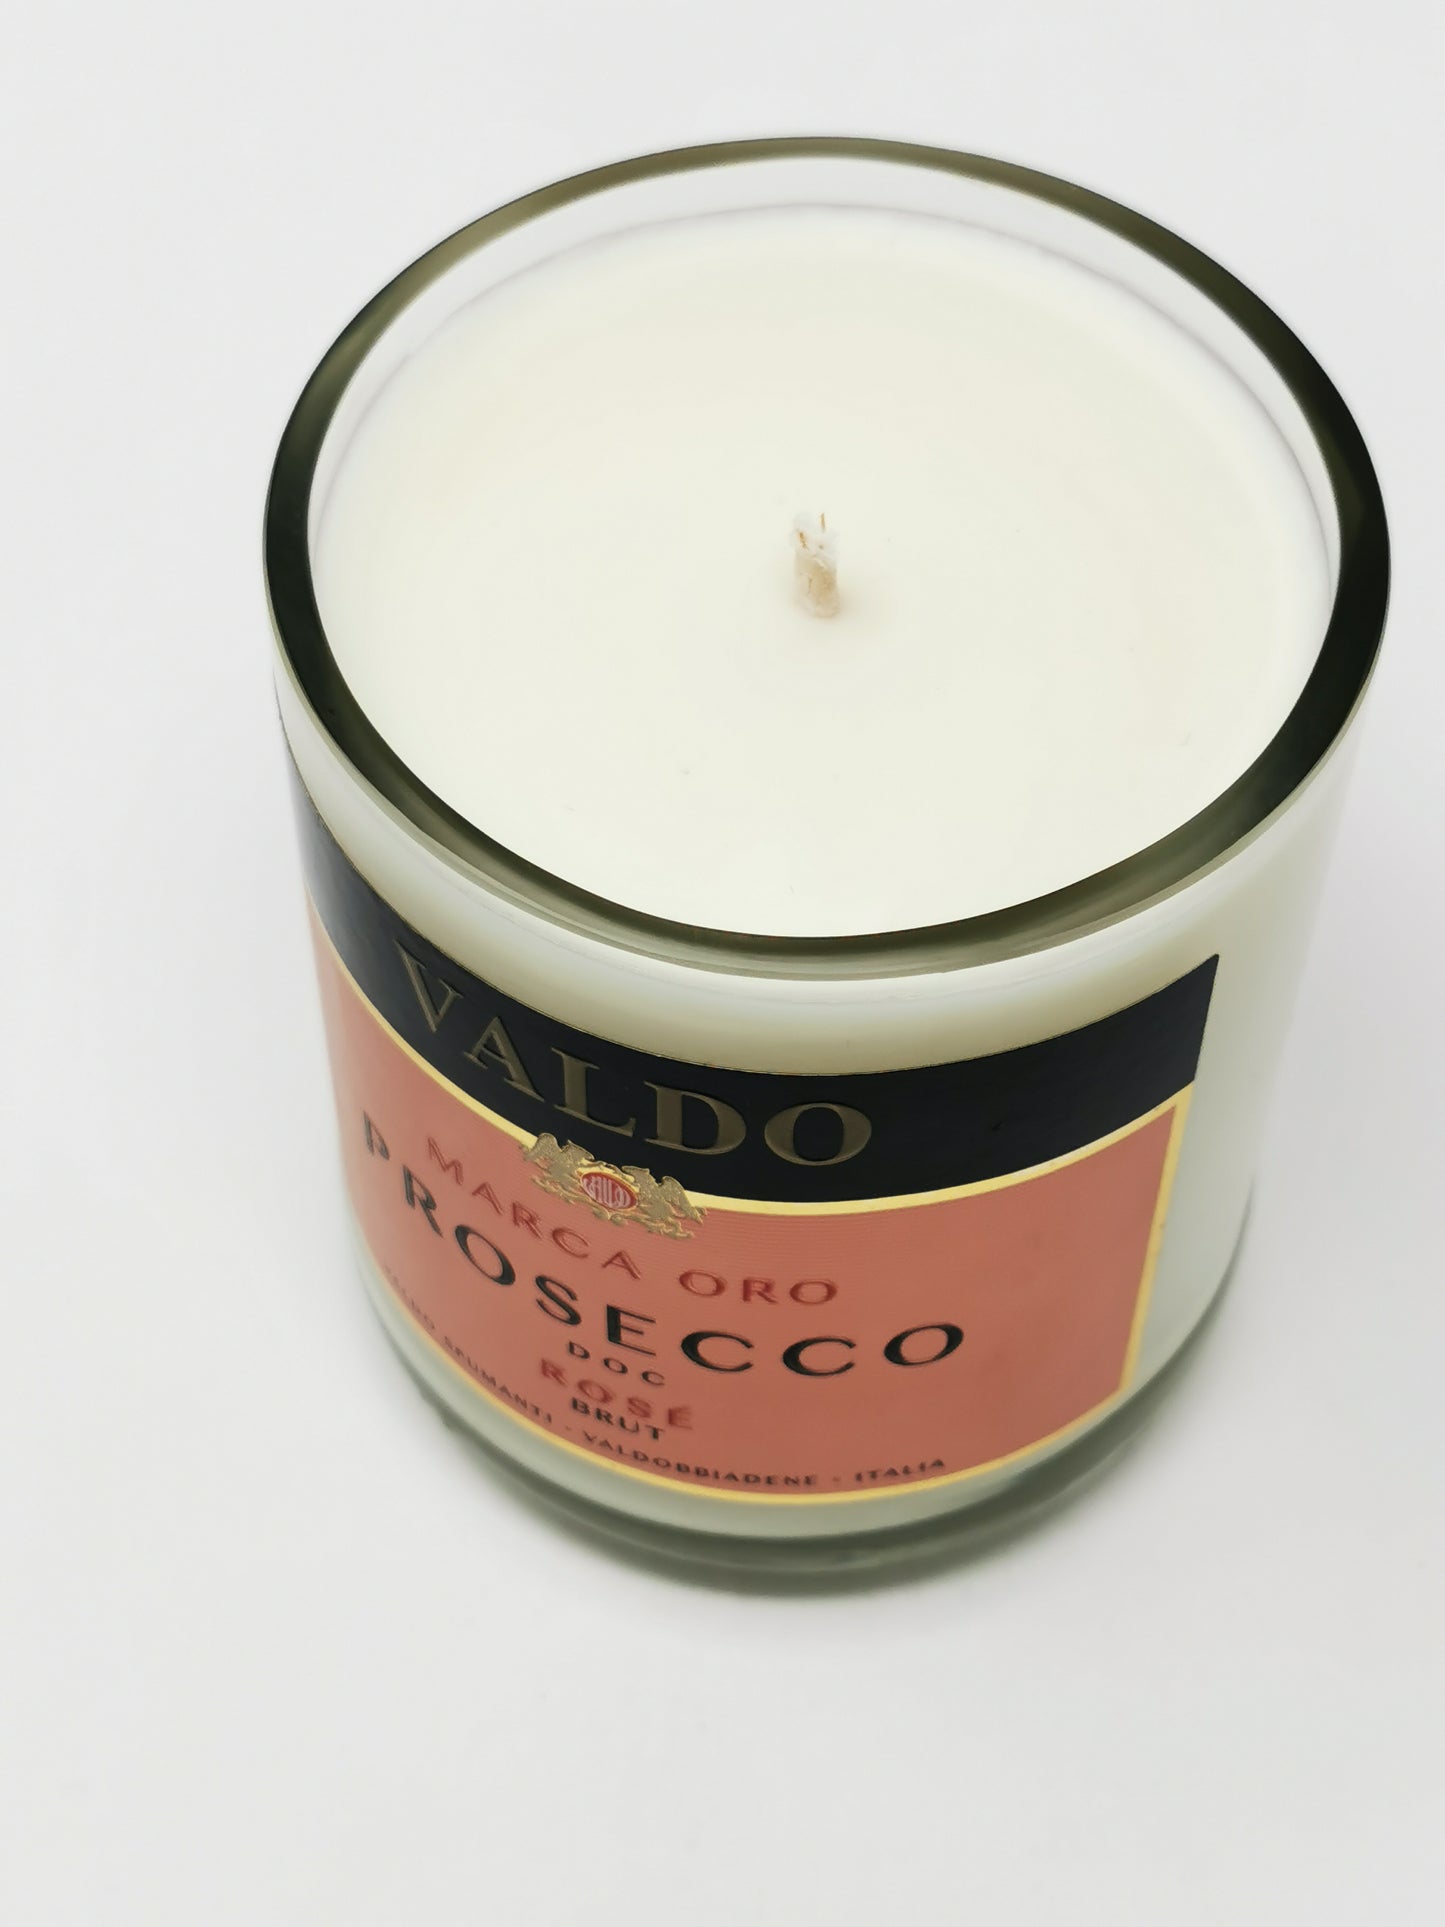 Valdo Rose Prosecco Bottle Candle-Wine & Prosecco Bottle Candles-Adhock Homeware